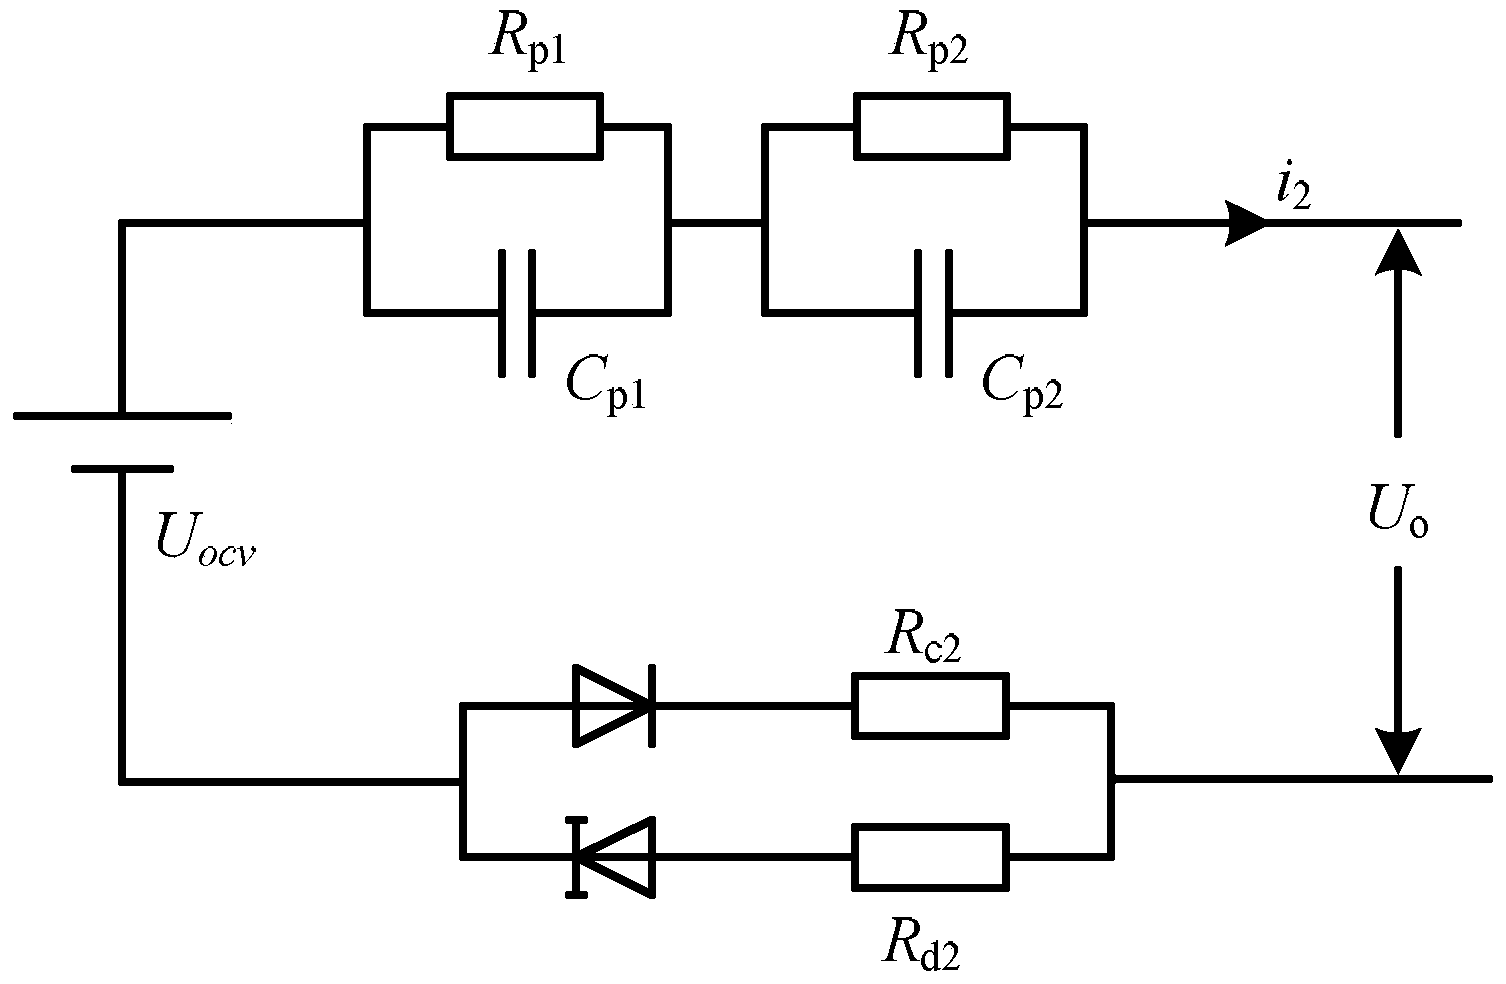 Online lithium ion battery SOC (state of charge) estimation method based on extended Kalman filter